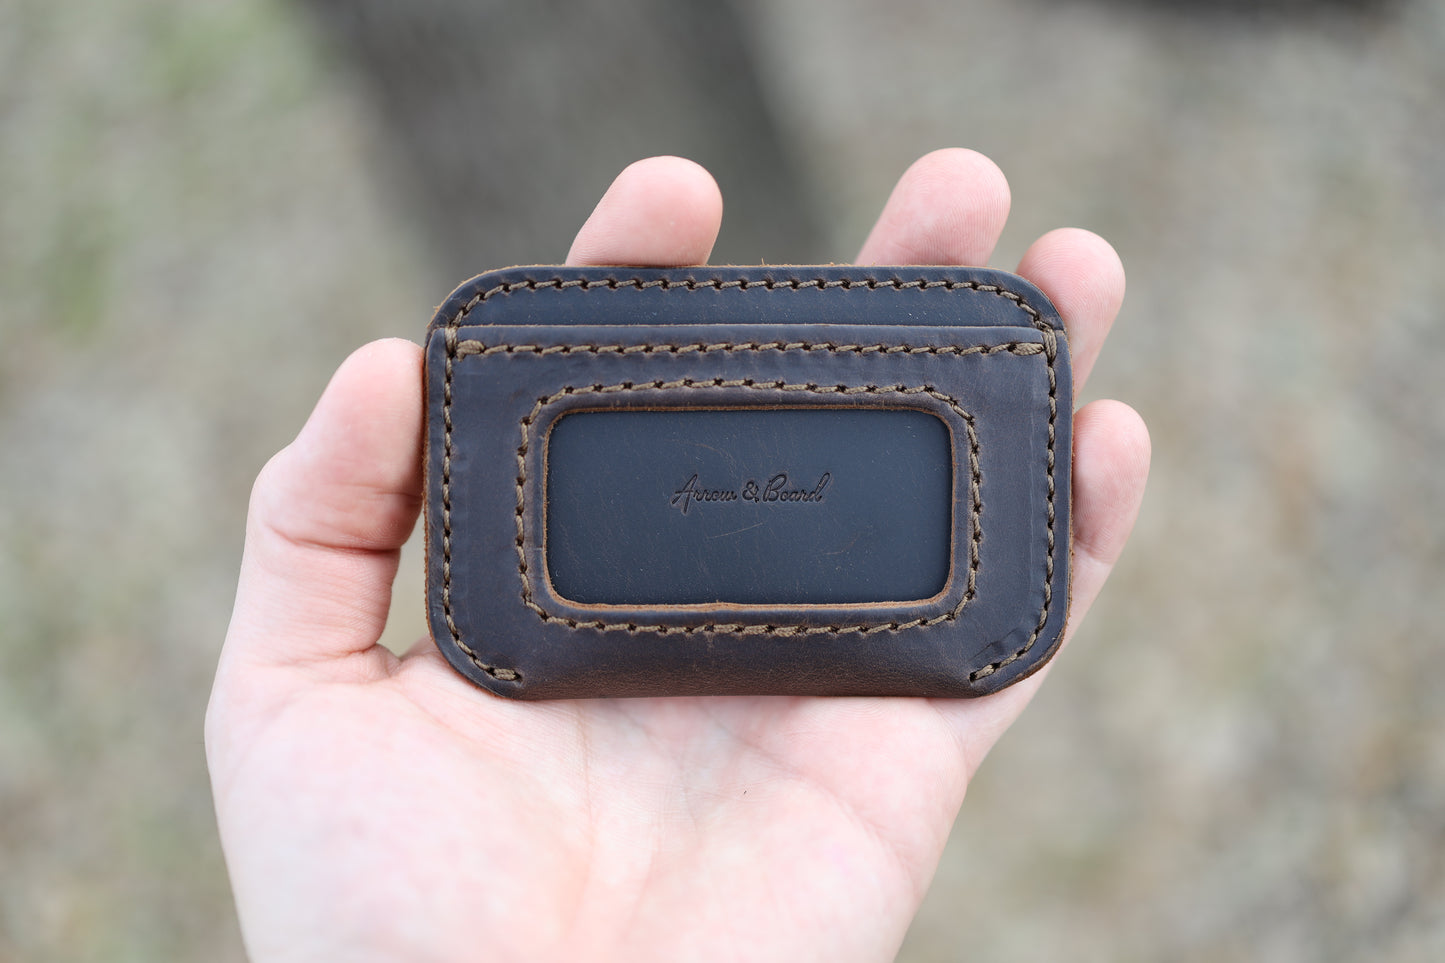 Leather Simple ID Wallet - Espresso